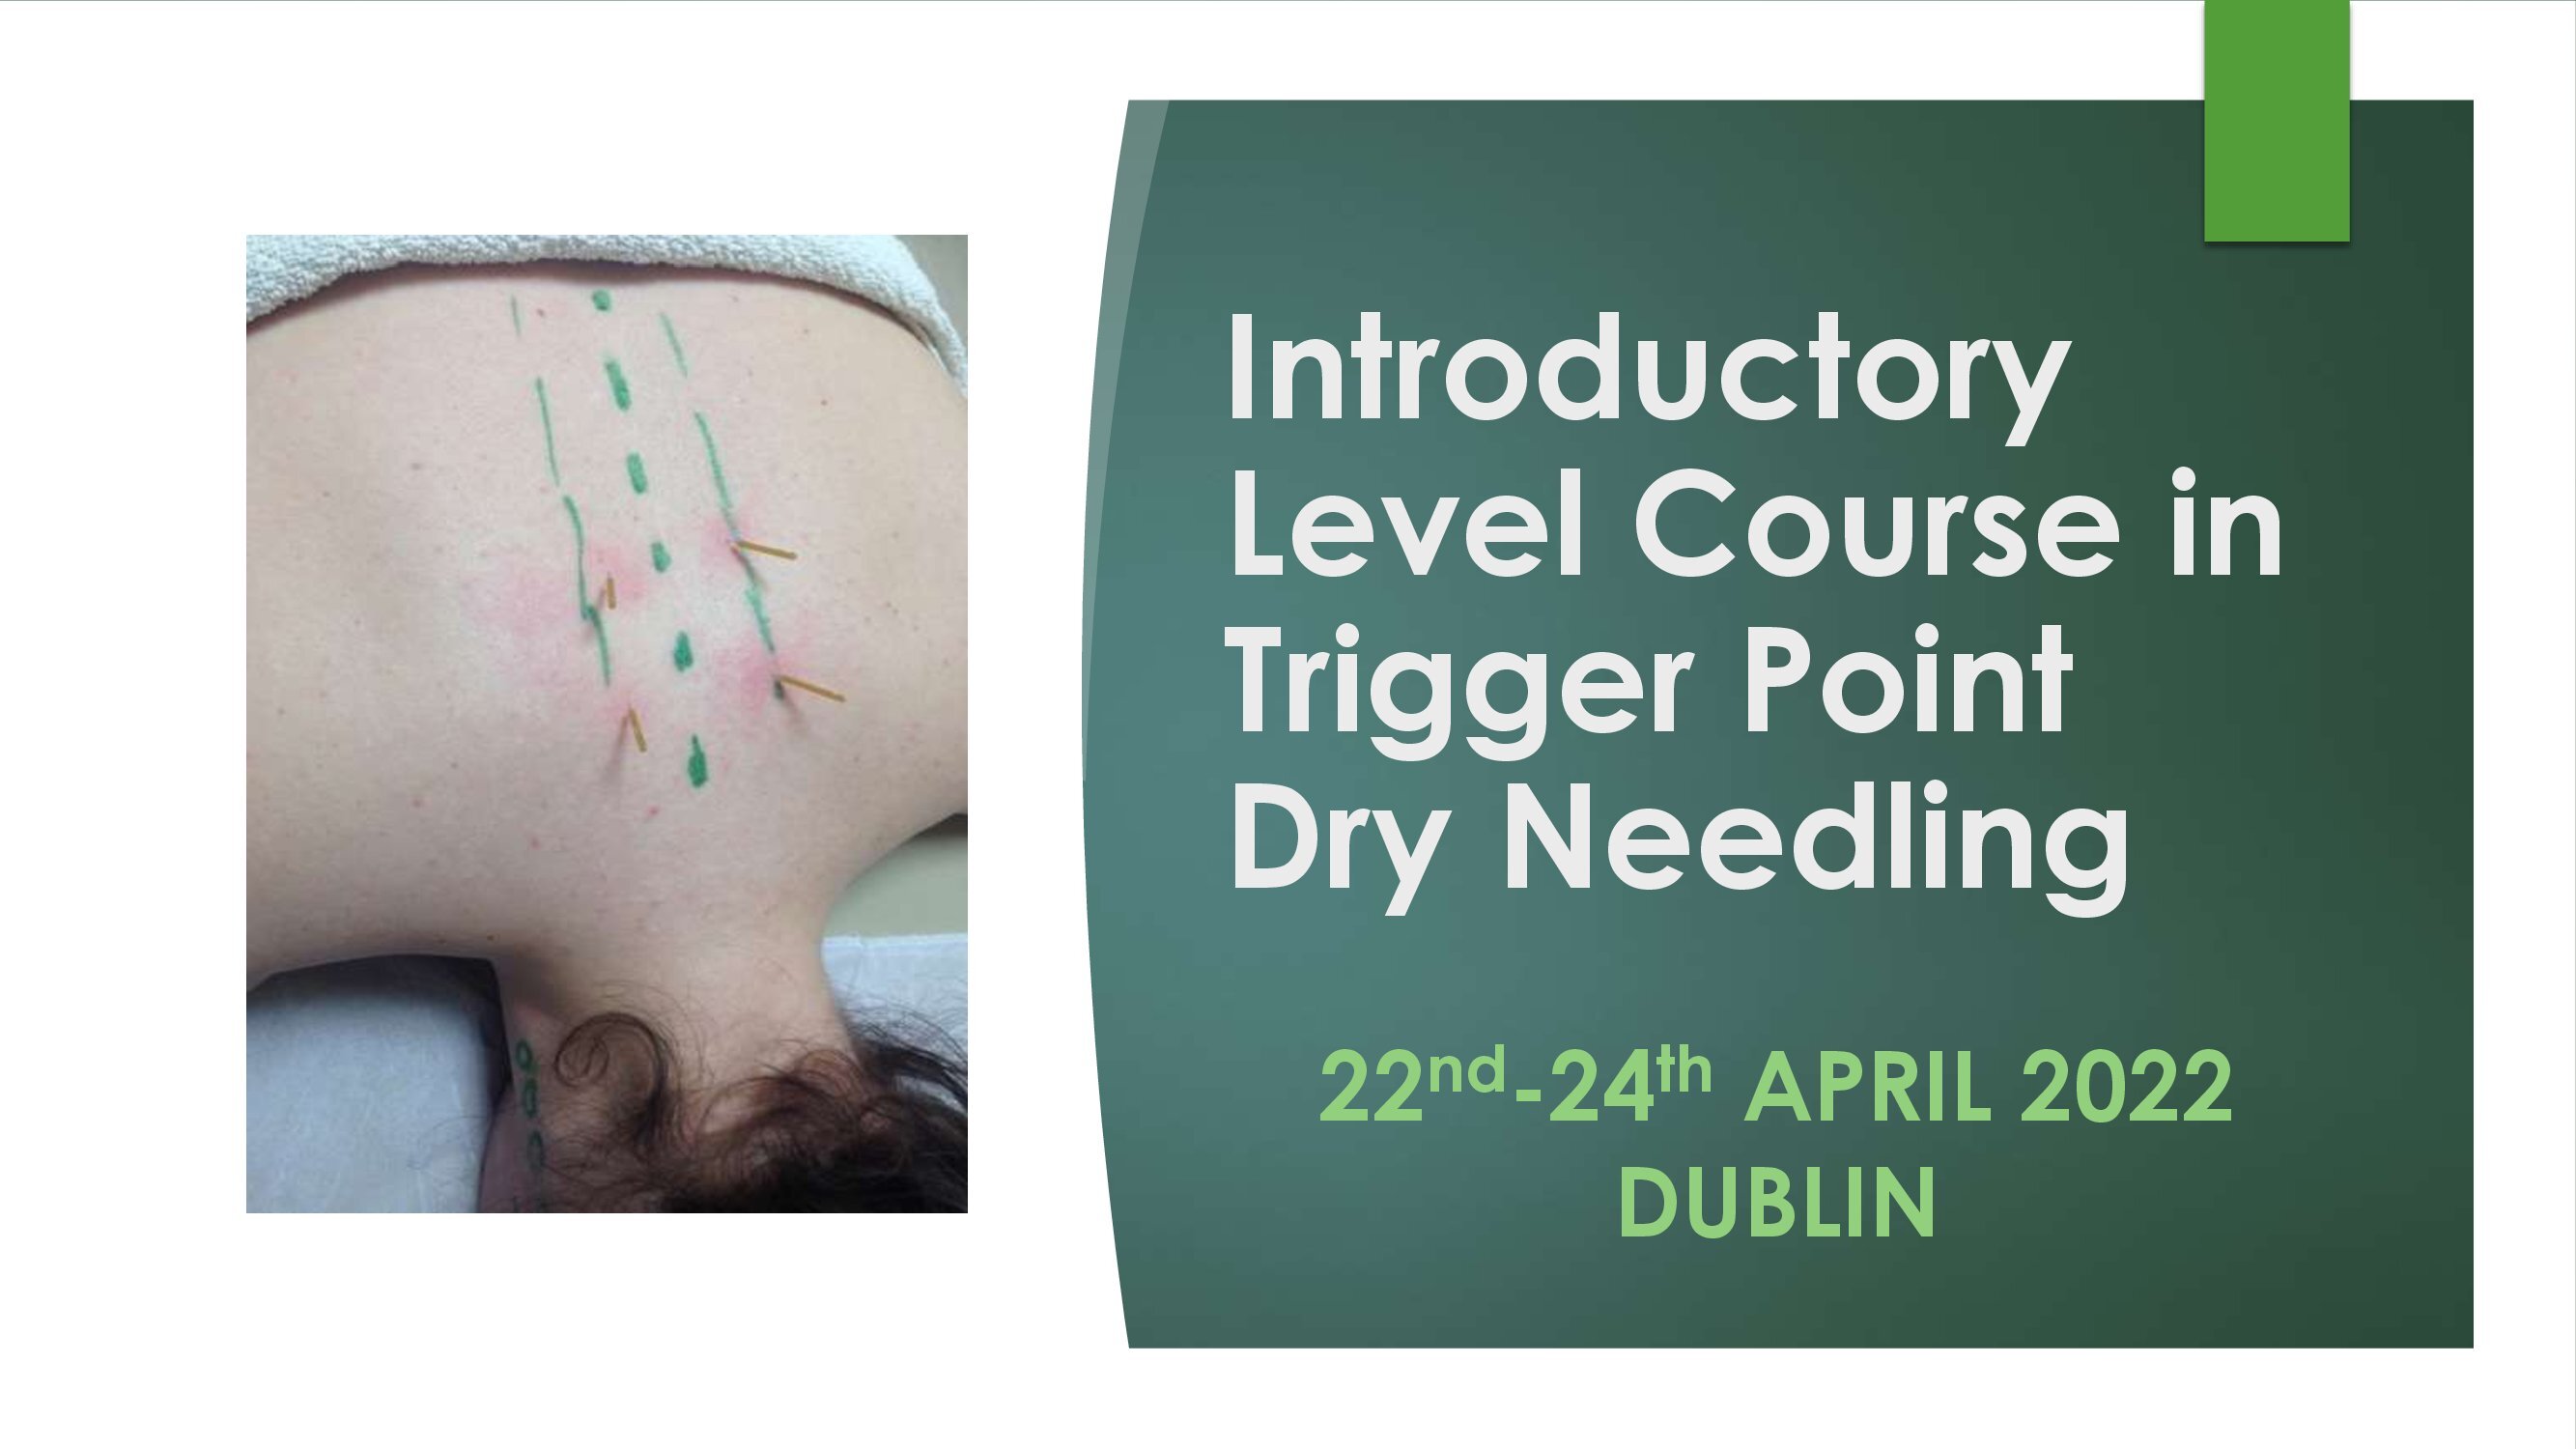 Introductory Level Trigger Point Dry Needling 22nd-24th April 2022, DUBLIN